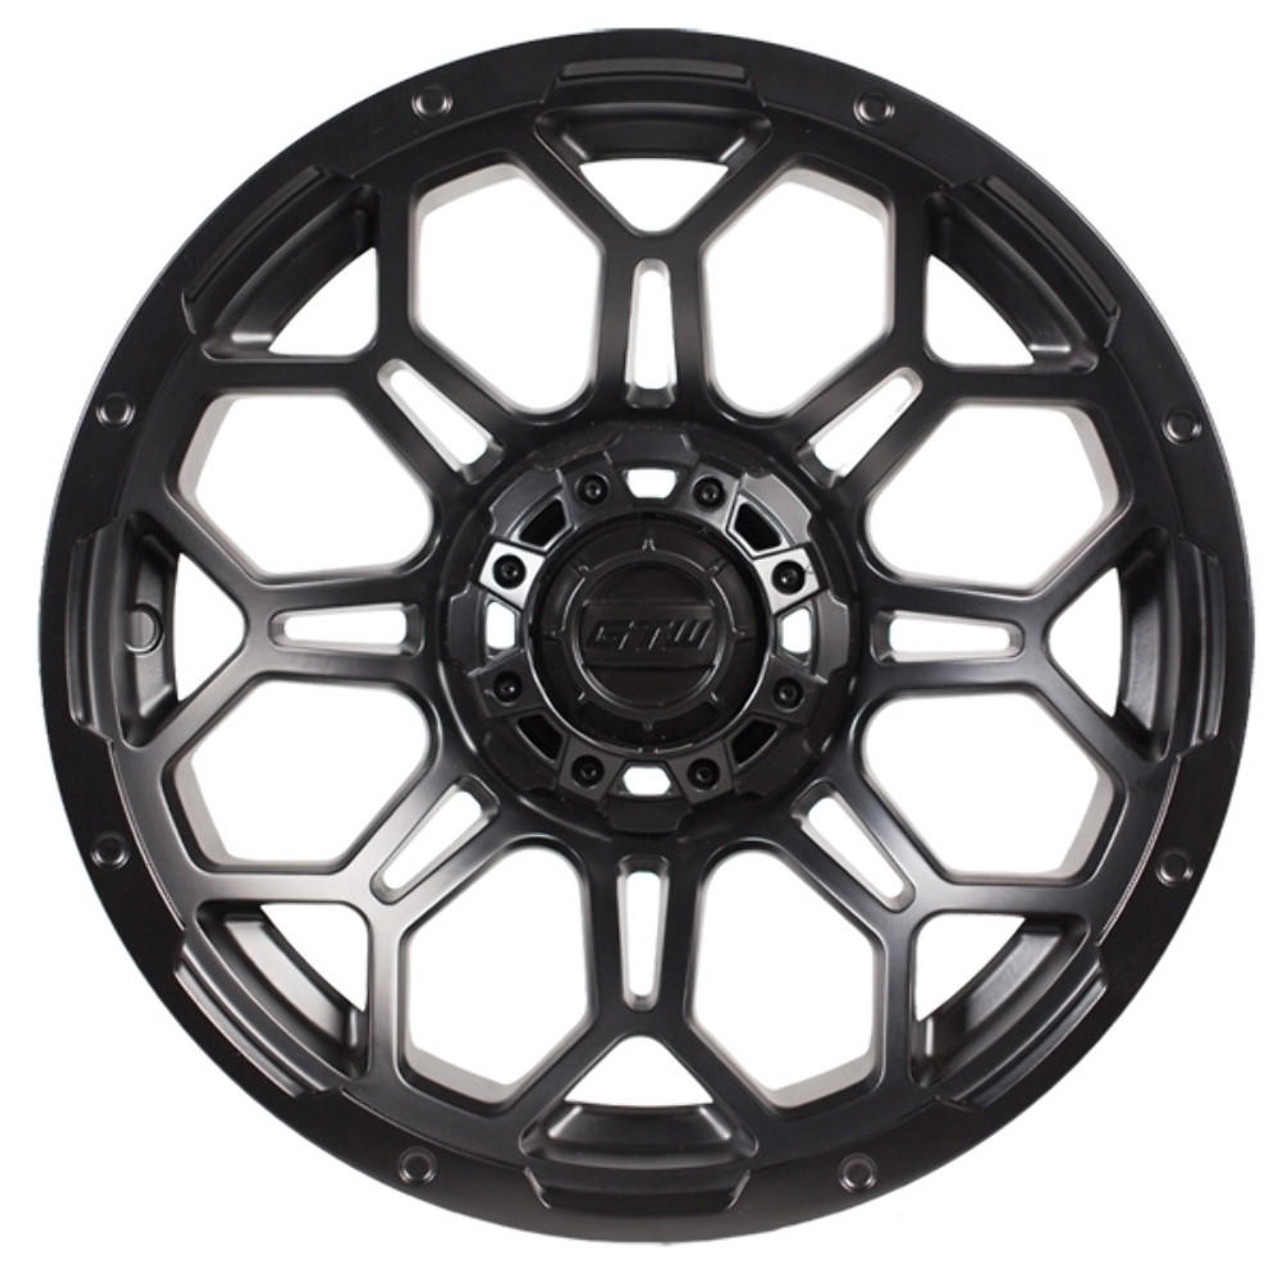  GTW 14" BRAVO Matte Black Wheels with Choice of Off-Road Tires - (Set of 4) 